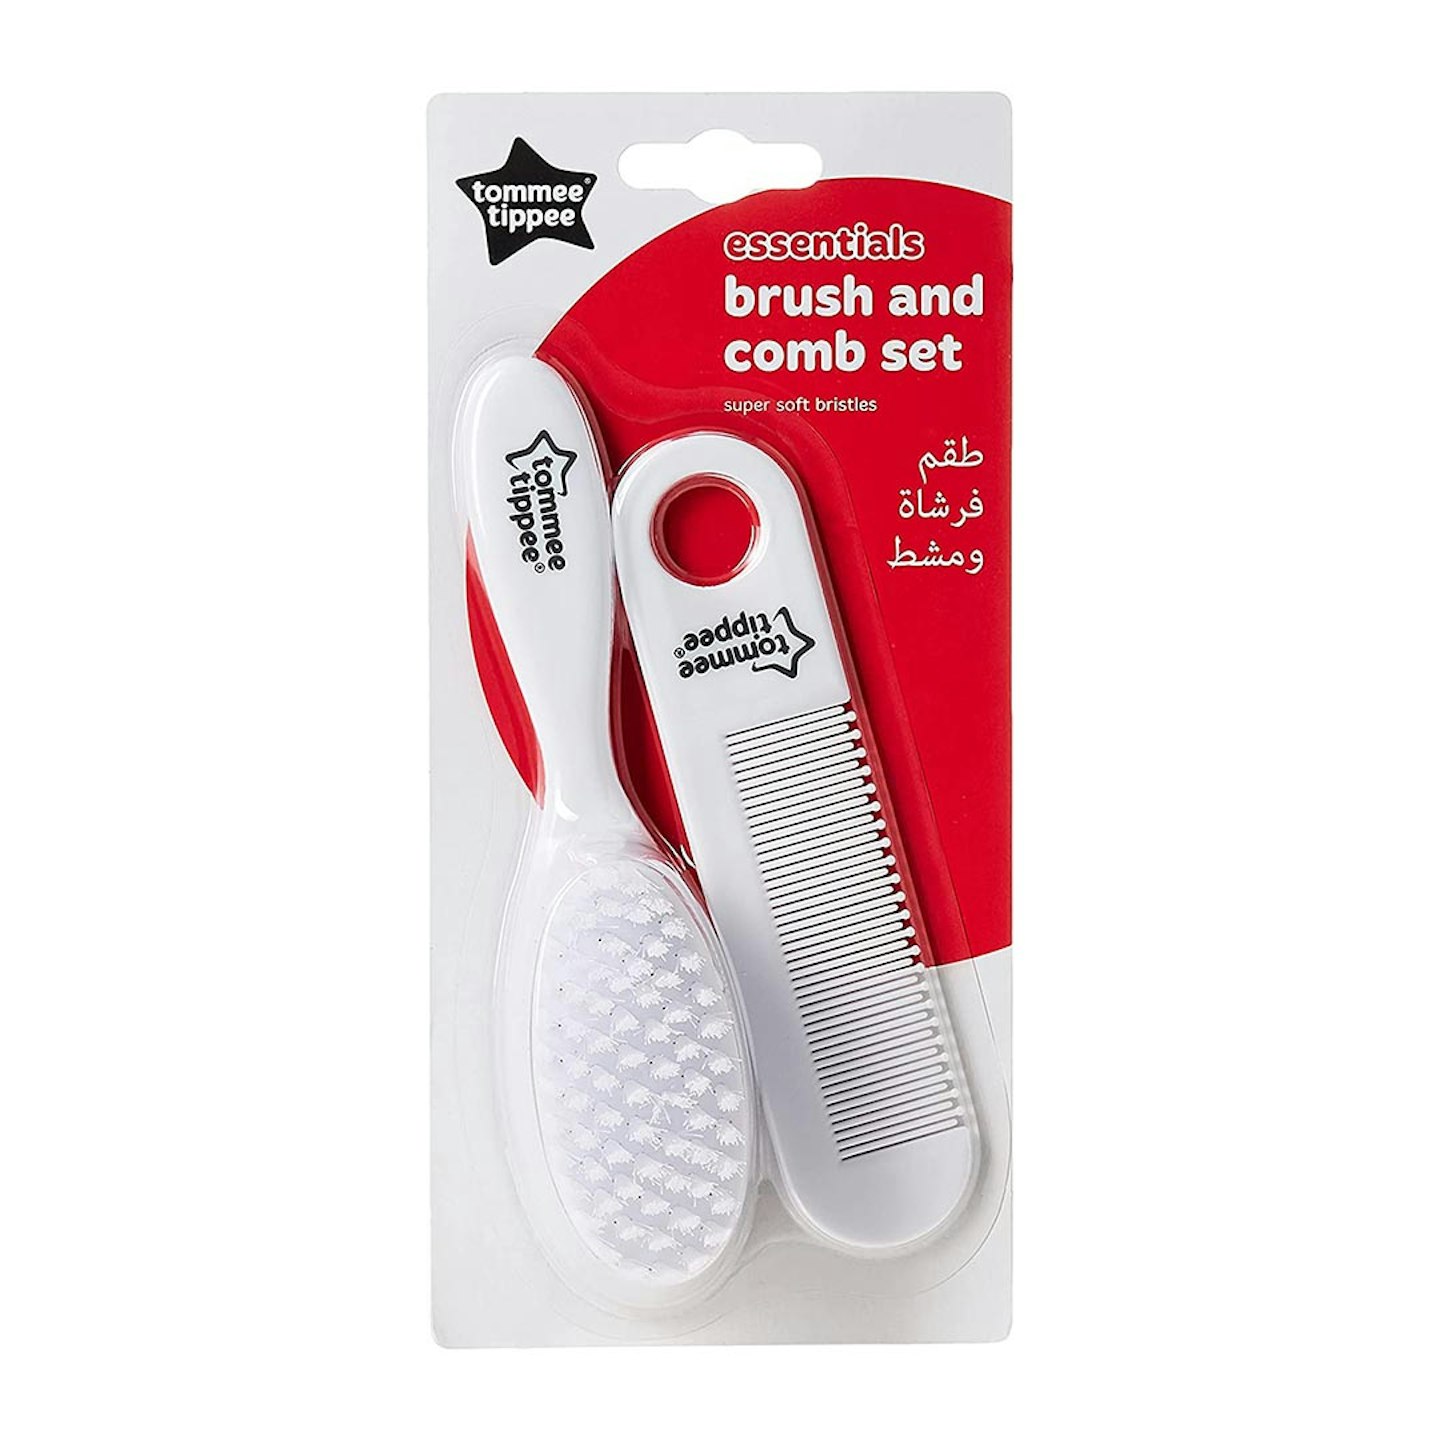 Tommee Tippee Essential Basics Brush and Comb